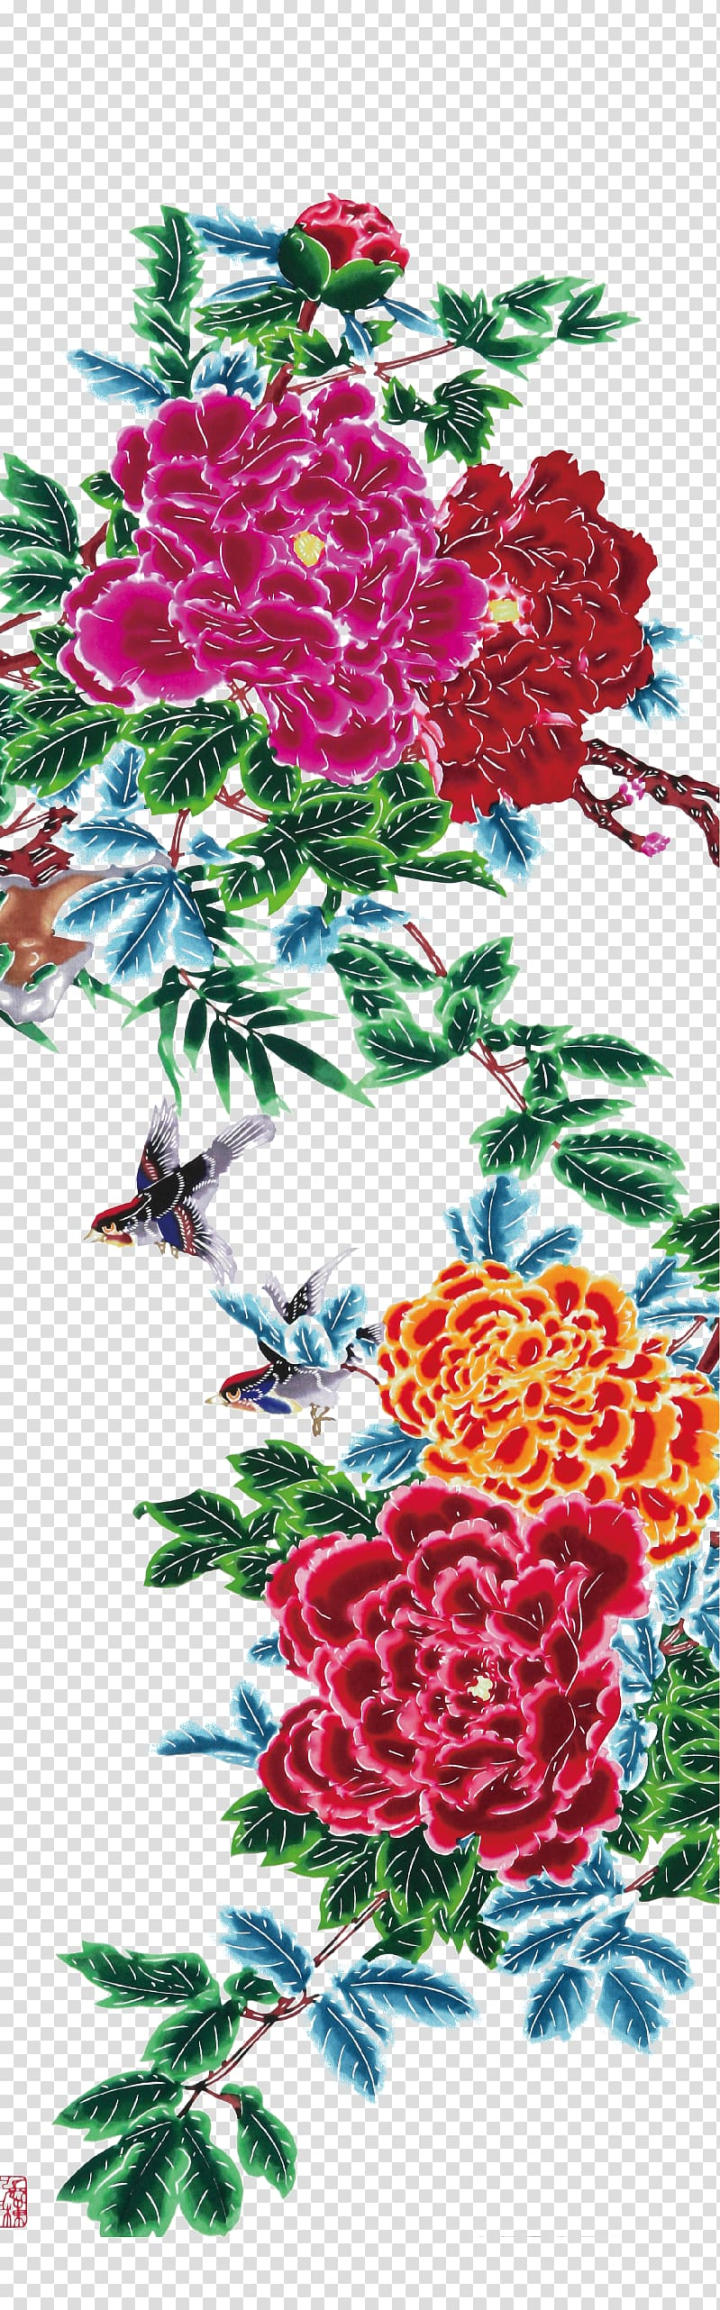 china,floral,design,wind,flower arranging,textile,branch,painting,flowers,handpainted flowers,nature,handpainted,line,needlework,petal,pink flower,plant,tree,watercolor flower,watercolor flowers,flowering plant,chinese,chinese wind element,craft,creative arts,element,euclidean vector,flora,floristry,flower bouquet,flower pattern,flower vector,floral design,flower,china wind,png clipart,free png,transparent background,free clipart,clip art,free download,png,comhiclipart